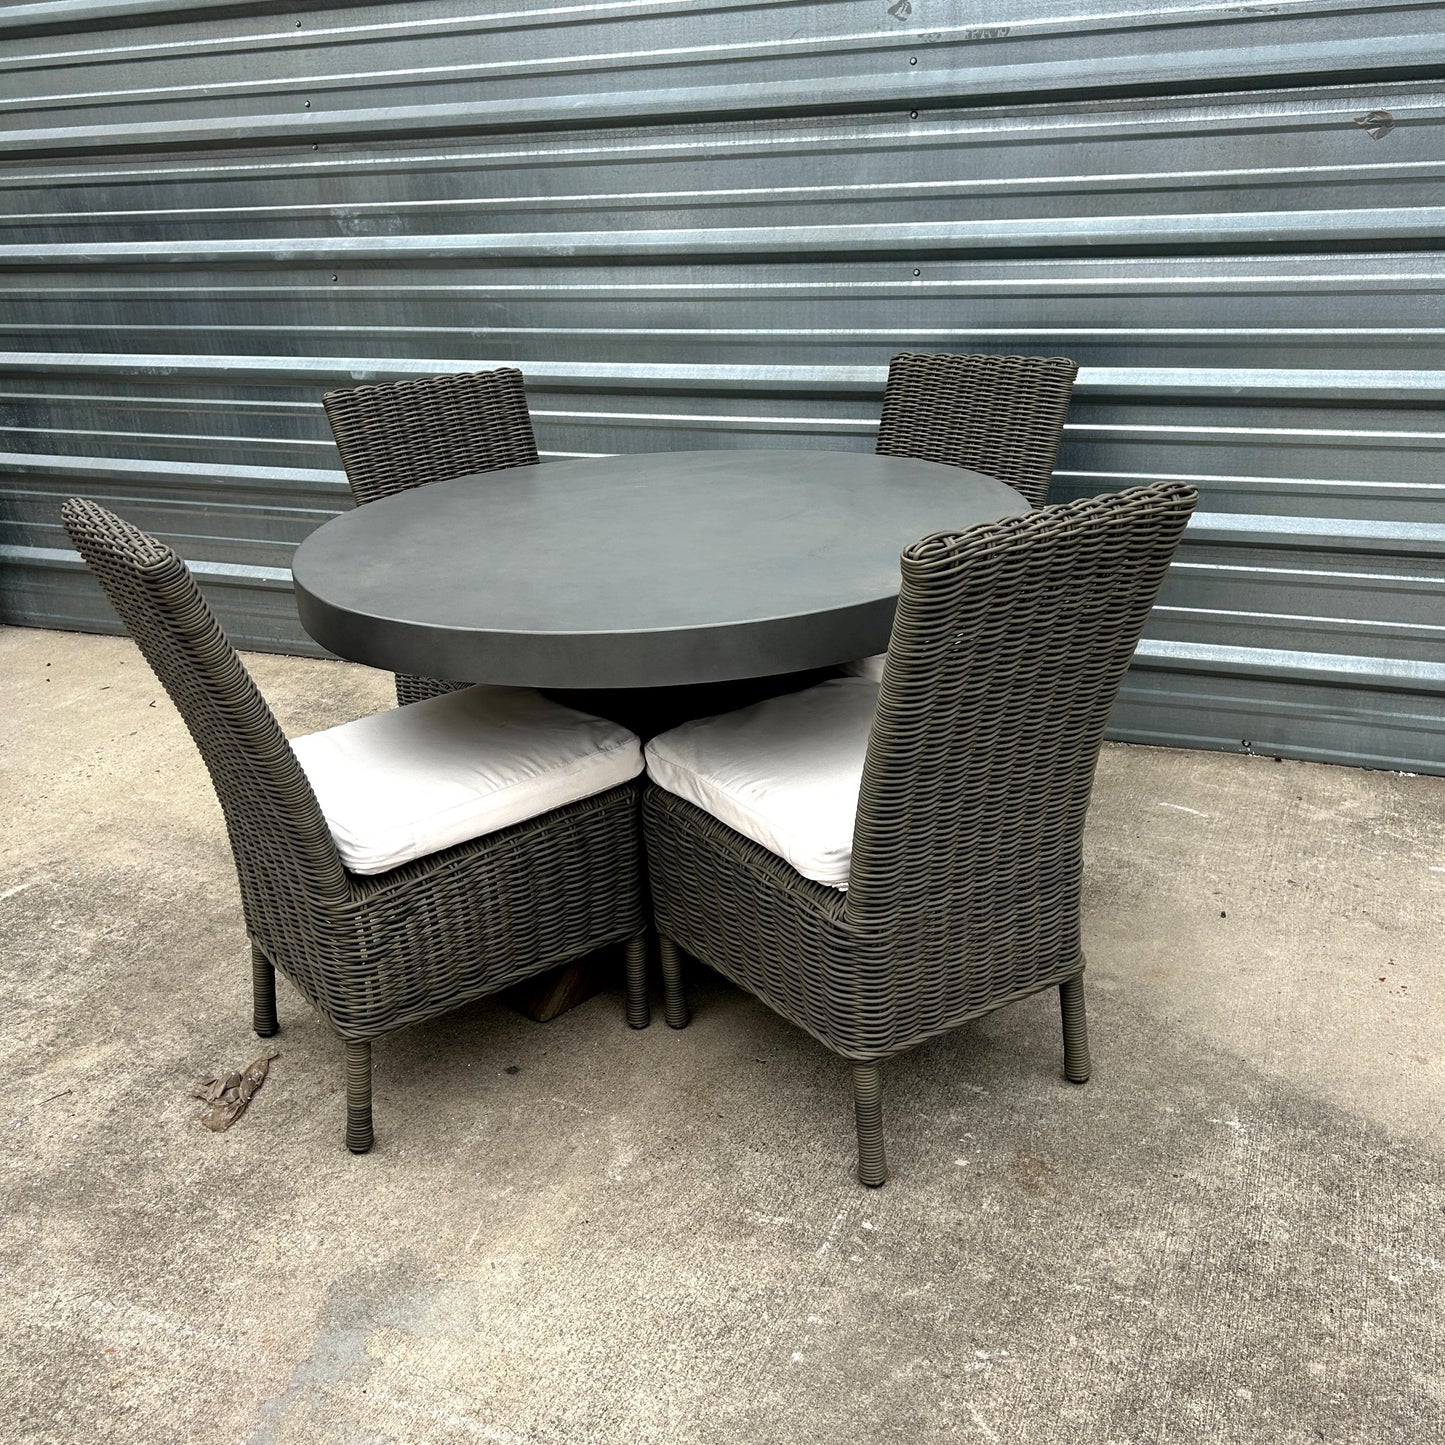 48" Patio Table w/ 4 Side Chairs